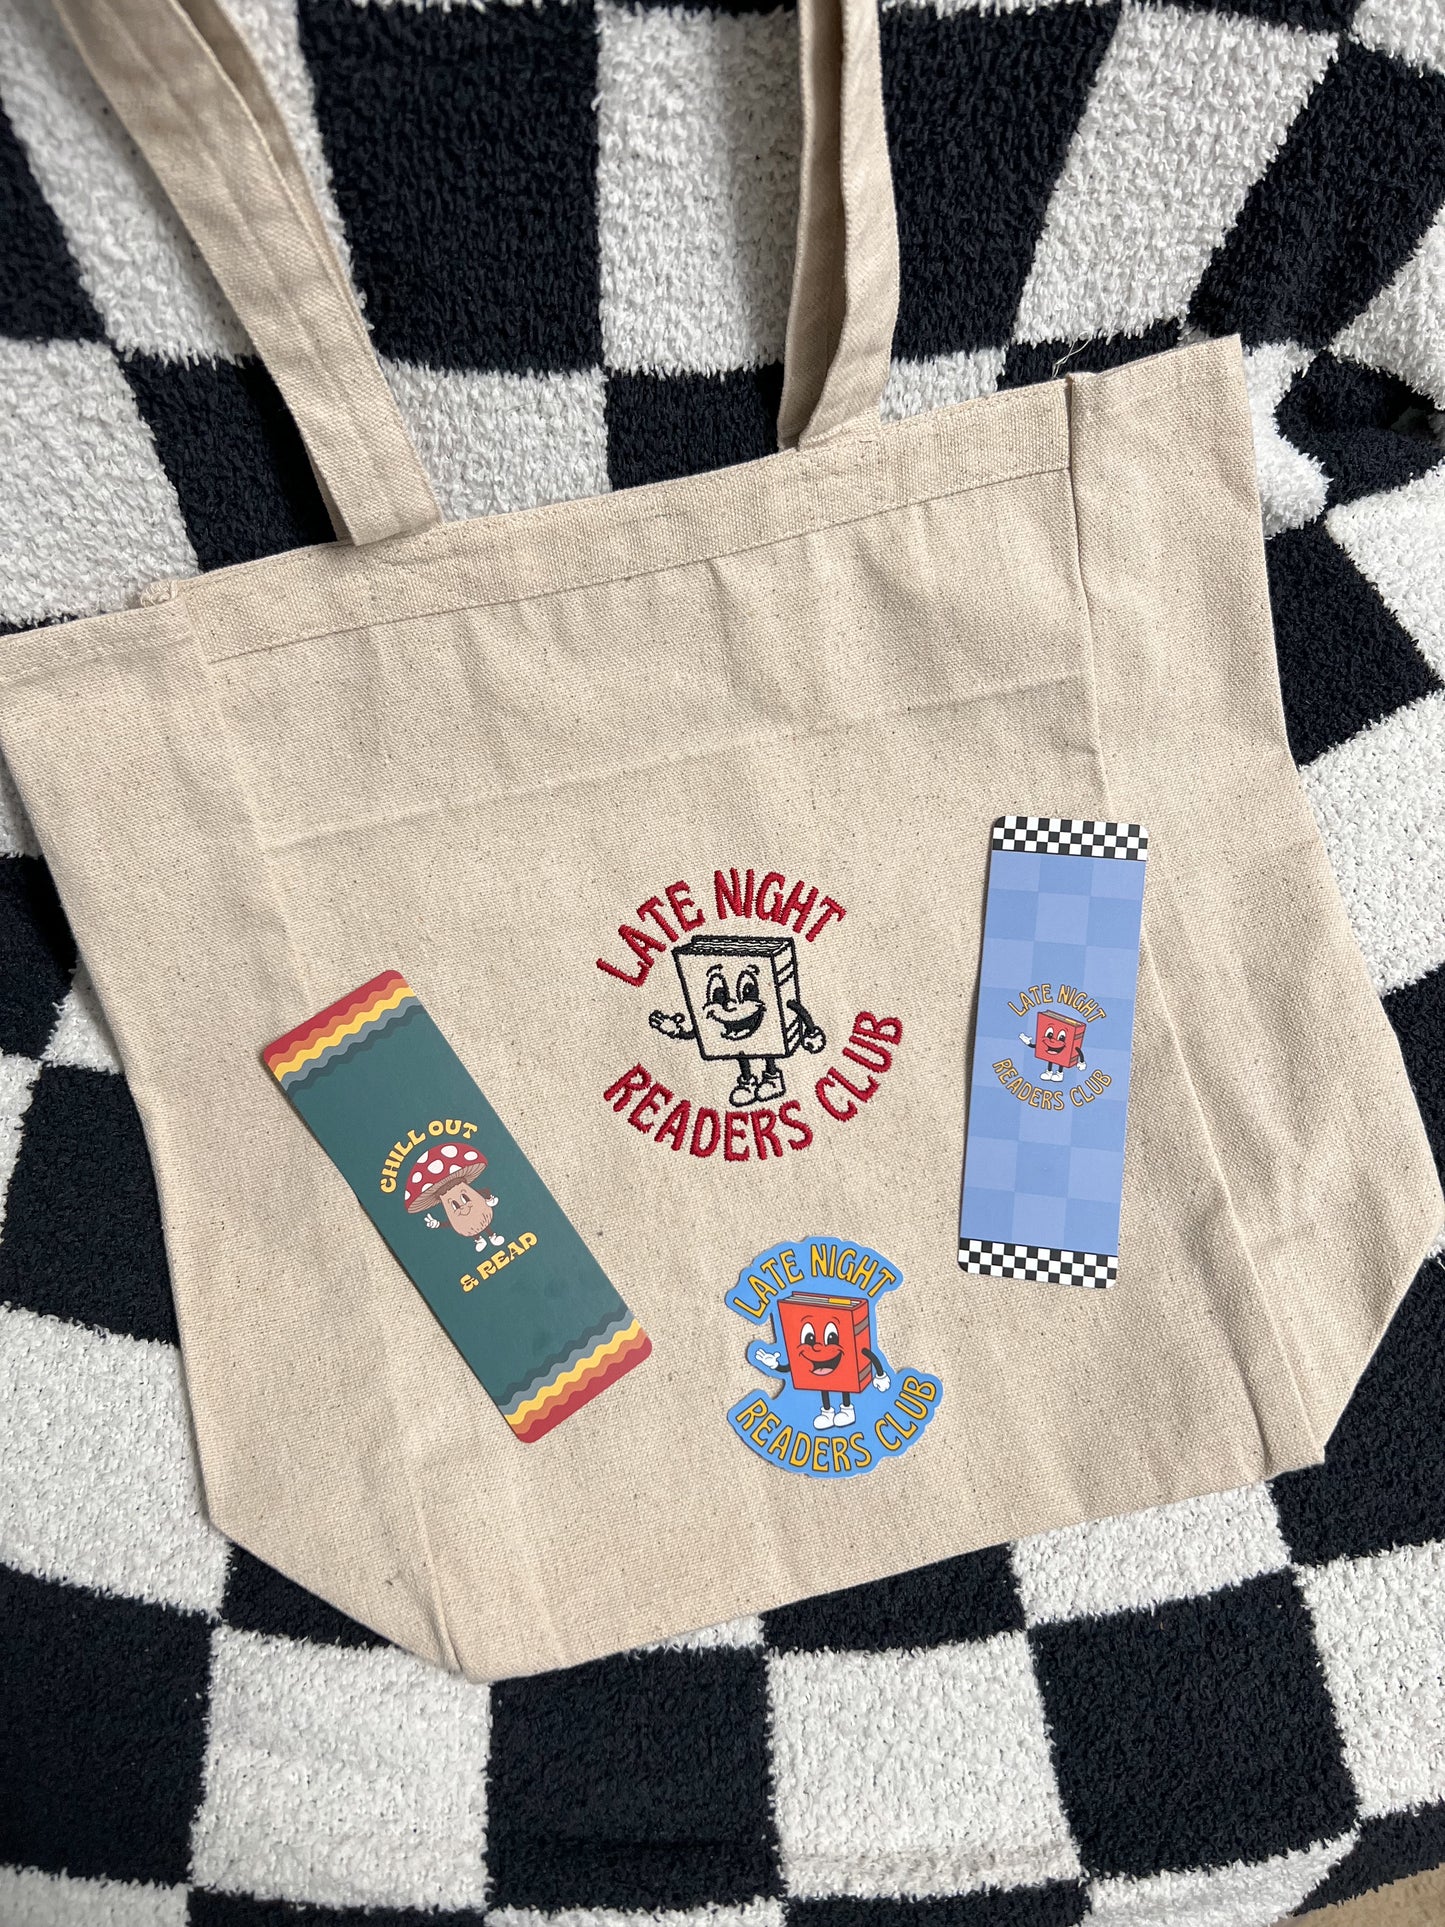 Late Night Readers Club Embroidered Tote